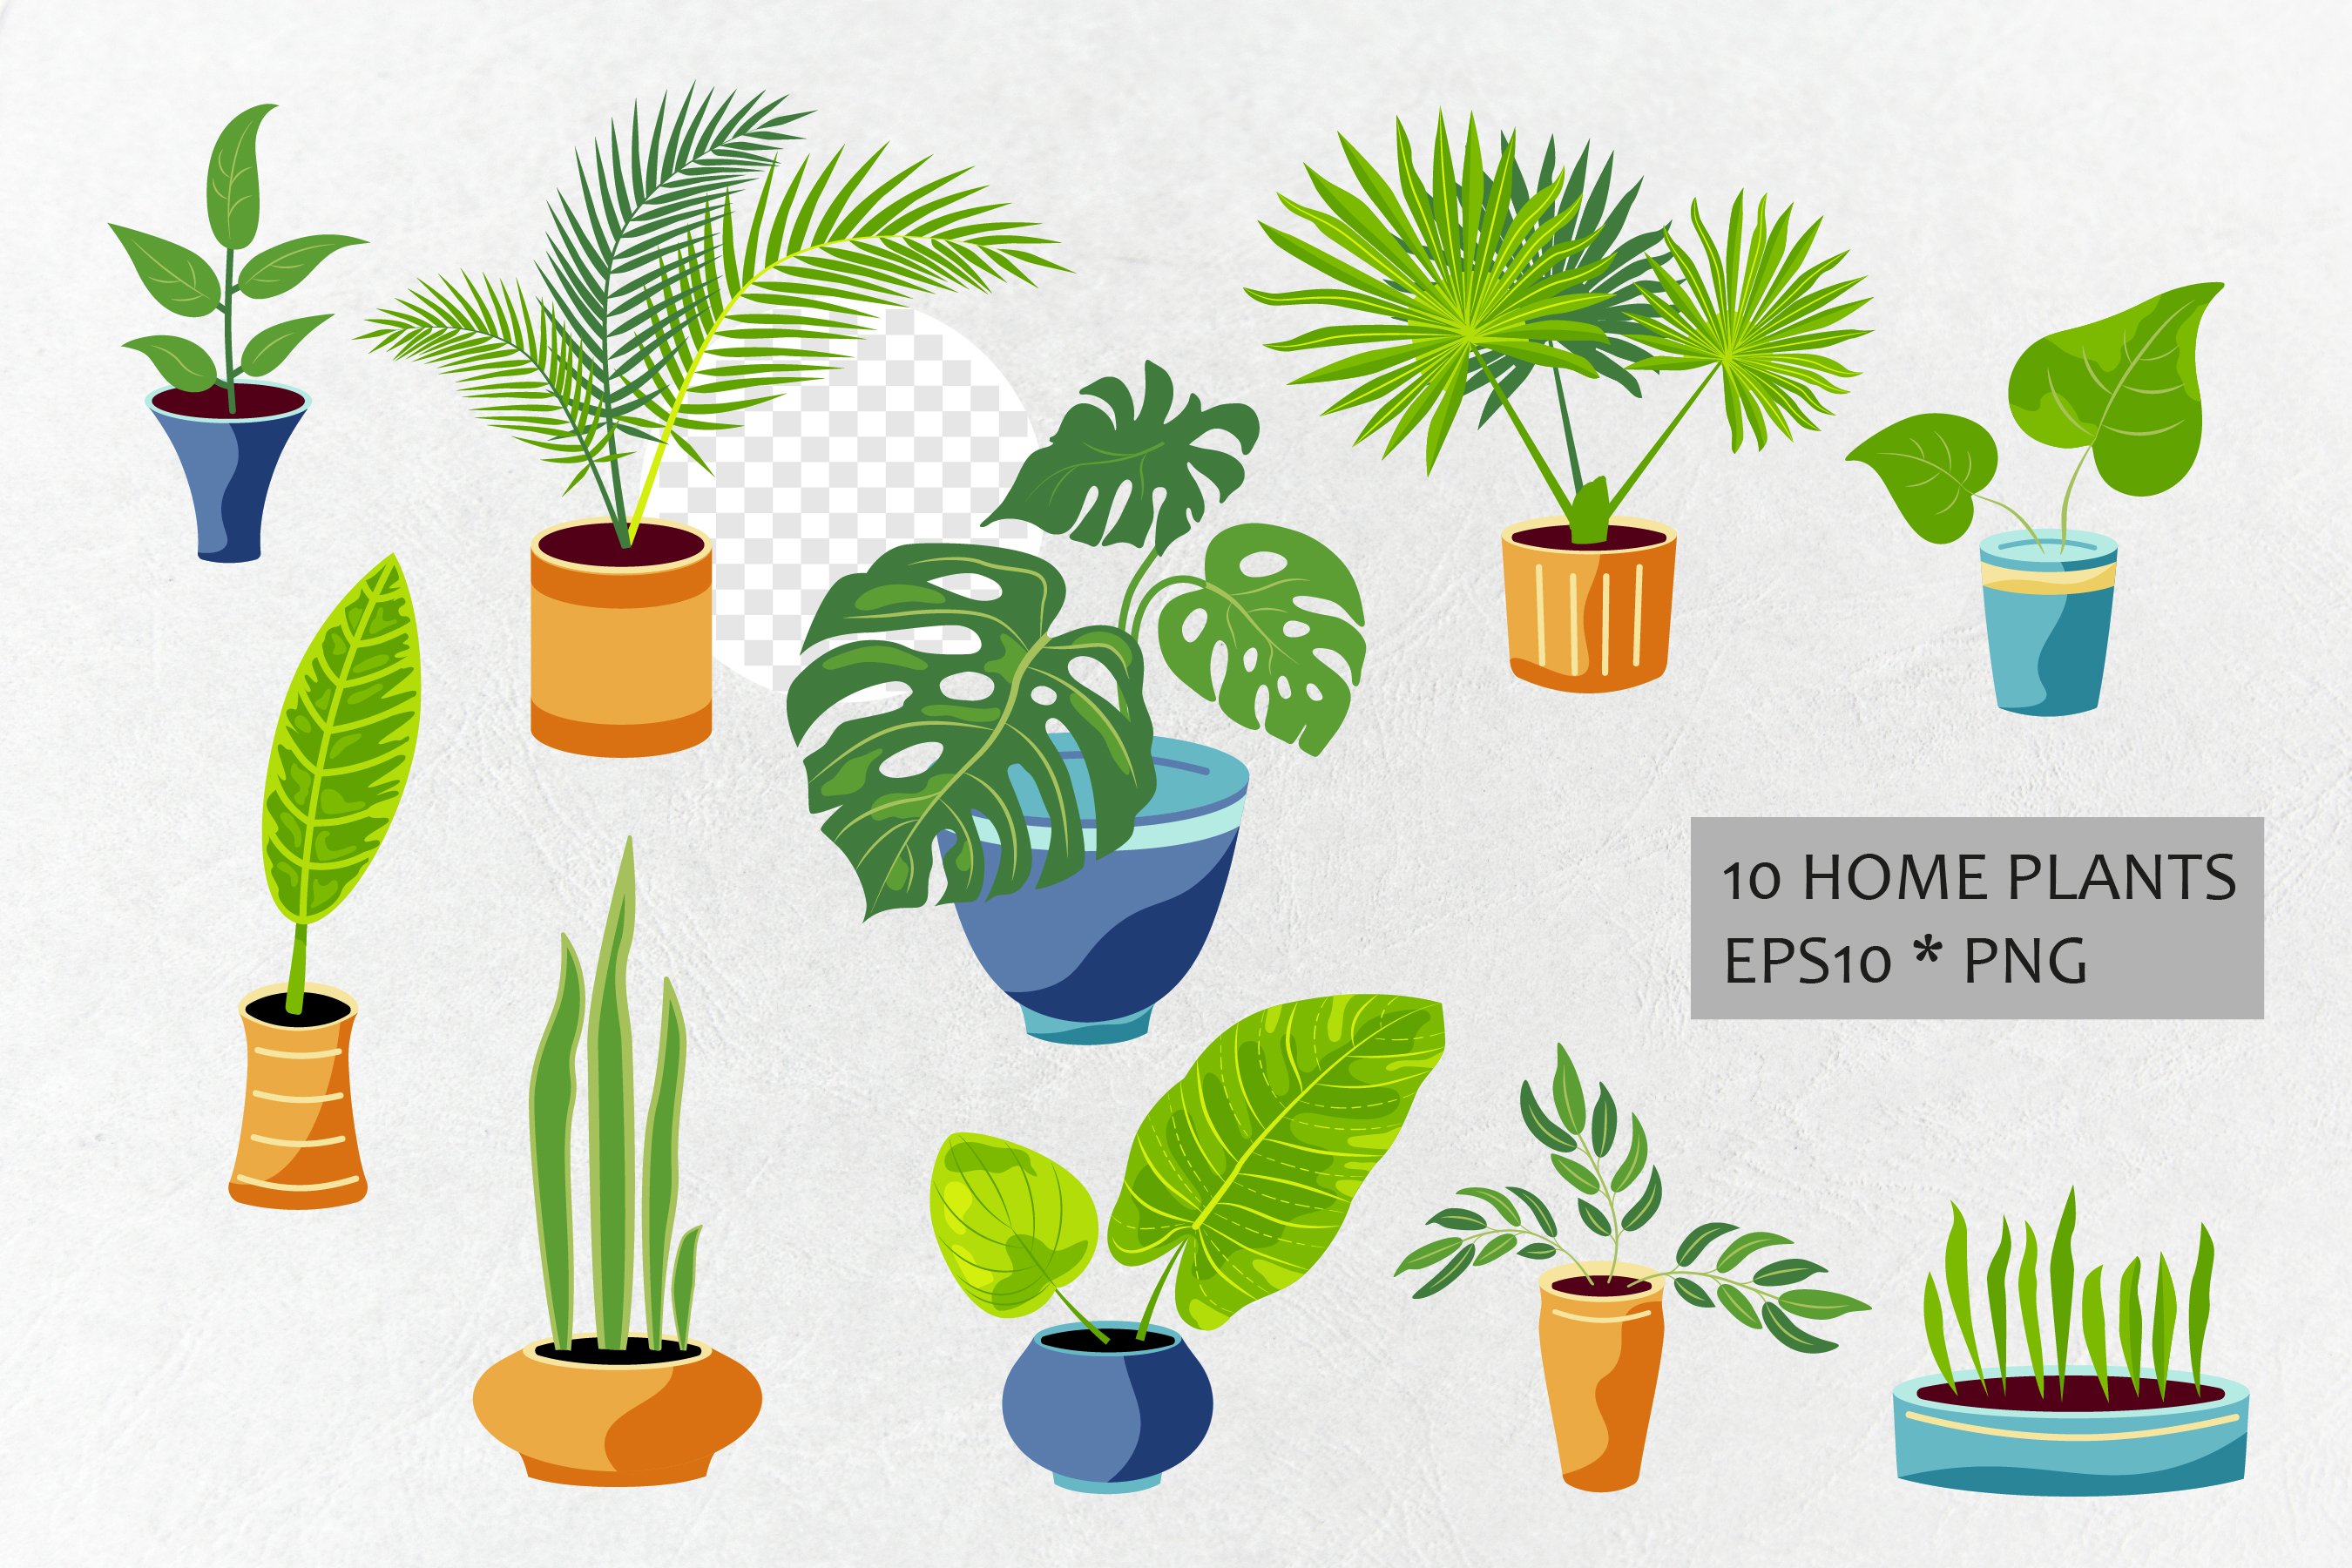 Variety of house plants in different pots.